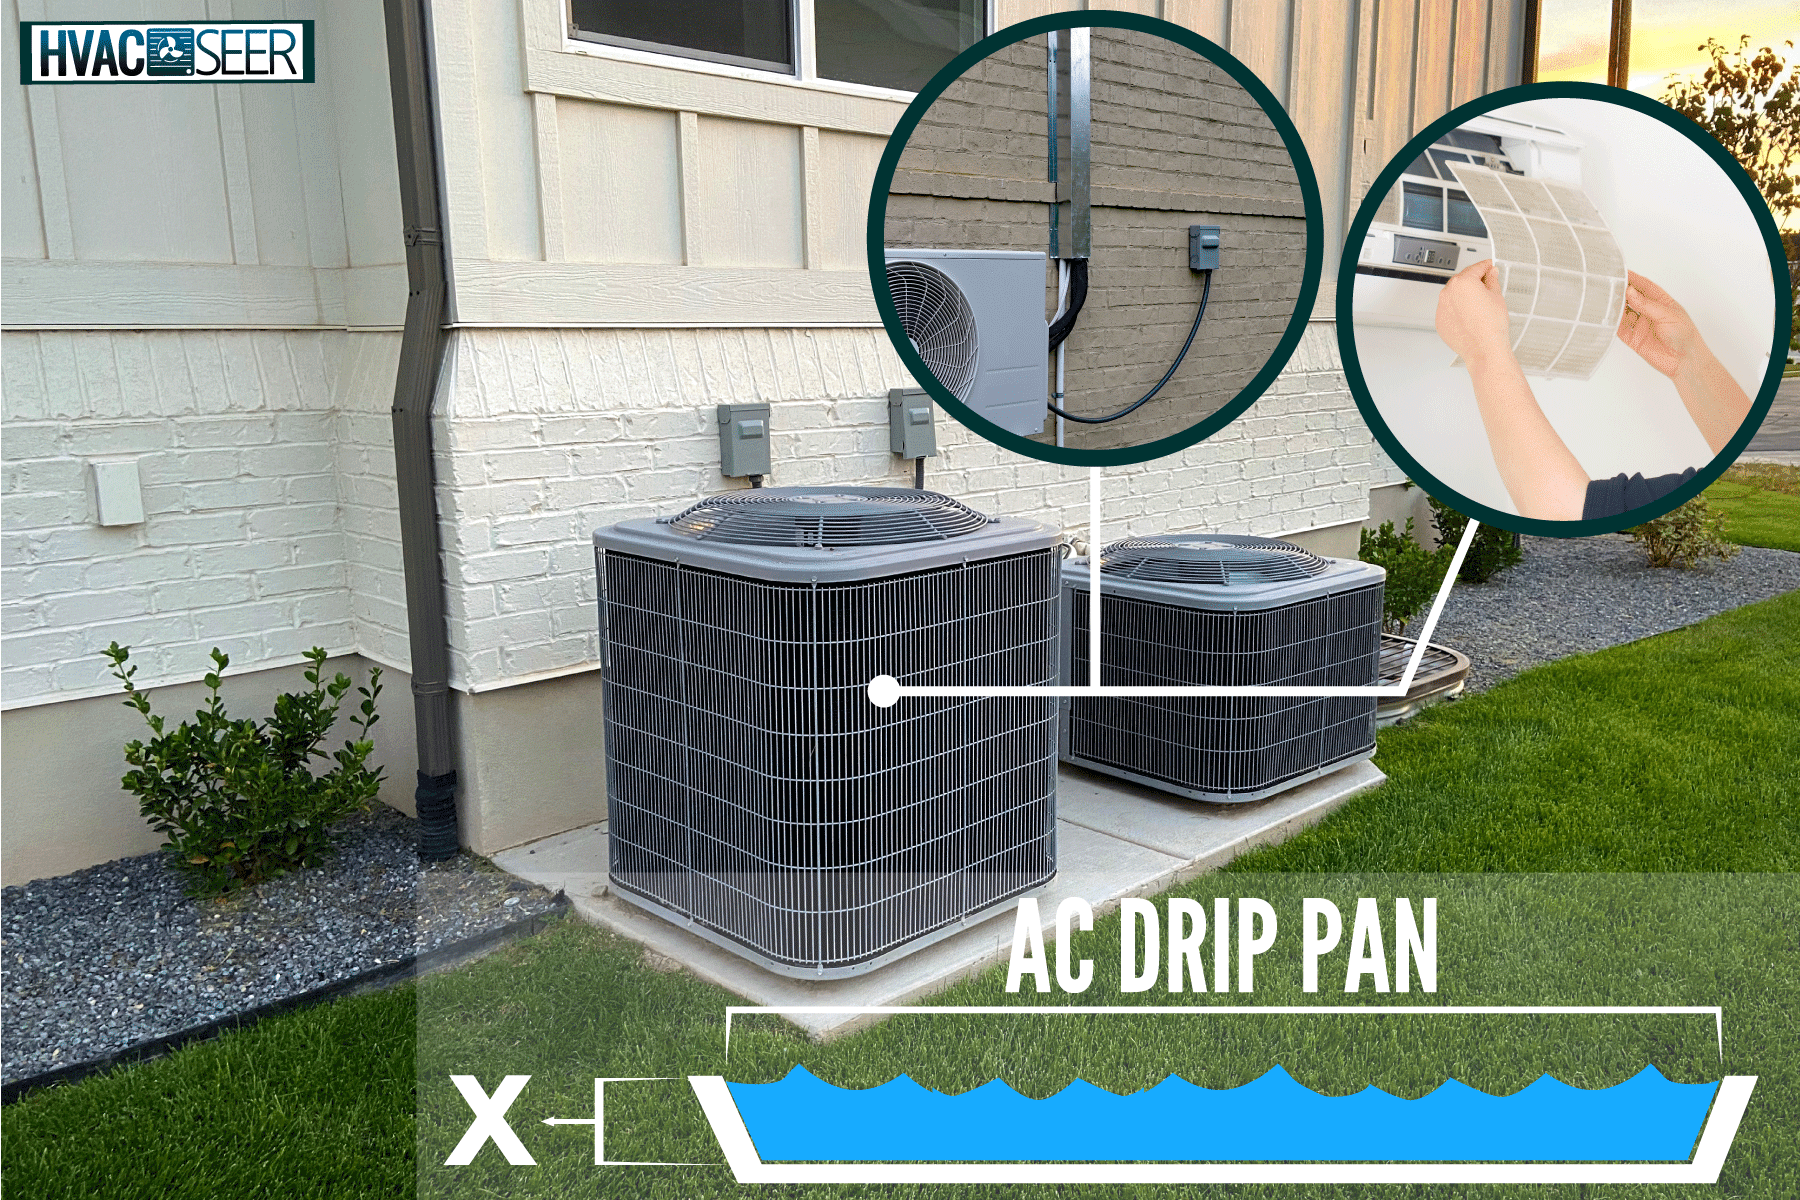 Air conditioning units mounted on concrete slabs at the back of a house, How Much Water Should Be In An AC Drip Pan?